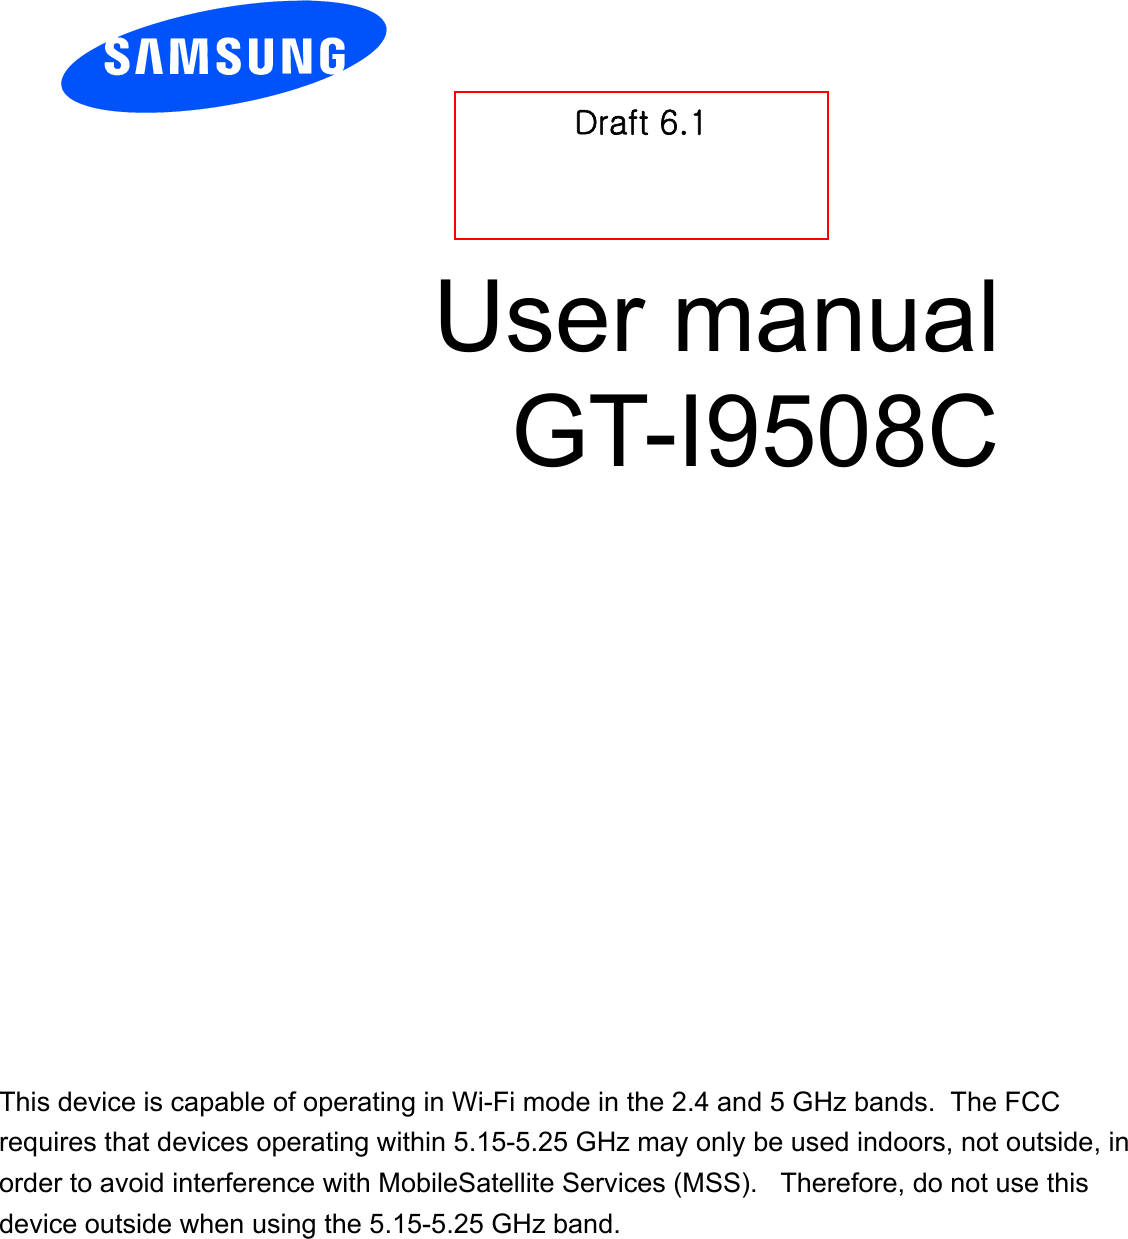          User manual GT-I9508C          Draft 6.1 GOnly for Approval This device is capable of operating in Wi-Fi mode in the 2.4 and 5 GHz bands.  The FCC requires that devices operating within 5.15-5.25 GHz may only be used indoors, not outside, in order to avoid interference with MobileSatellite Services (MSS).   Therefore, do not use this device outside when using the 5.15-5.25 GHz band.